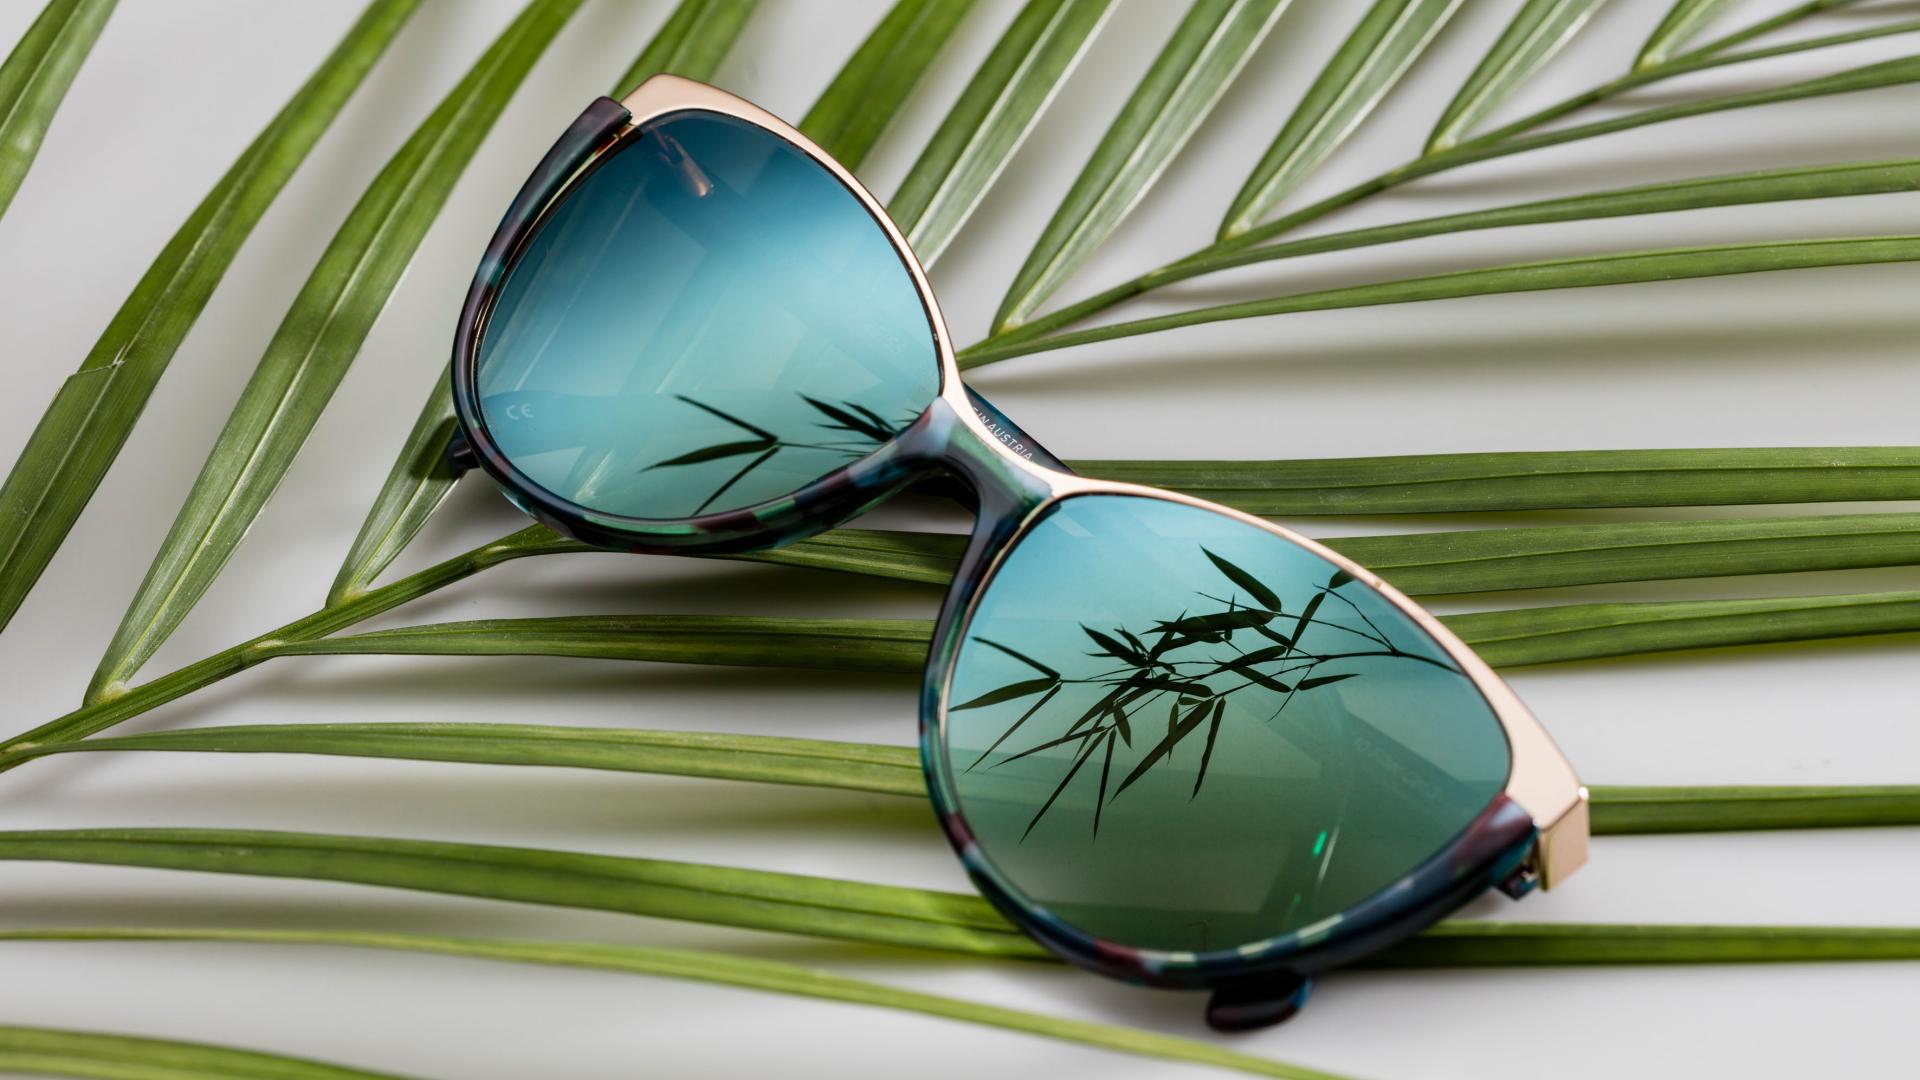 ZEISS Sunglass Lenses with mirror effect